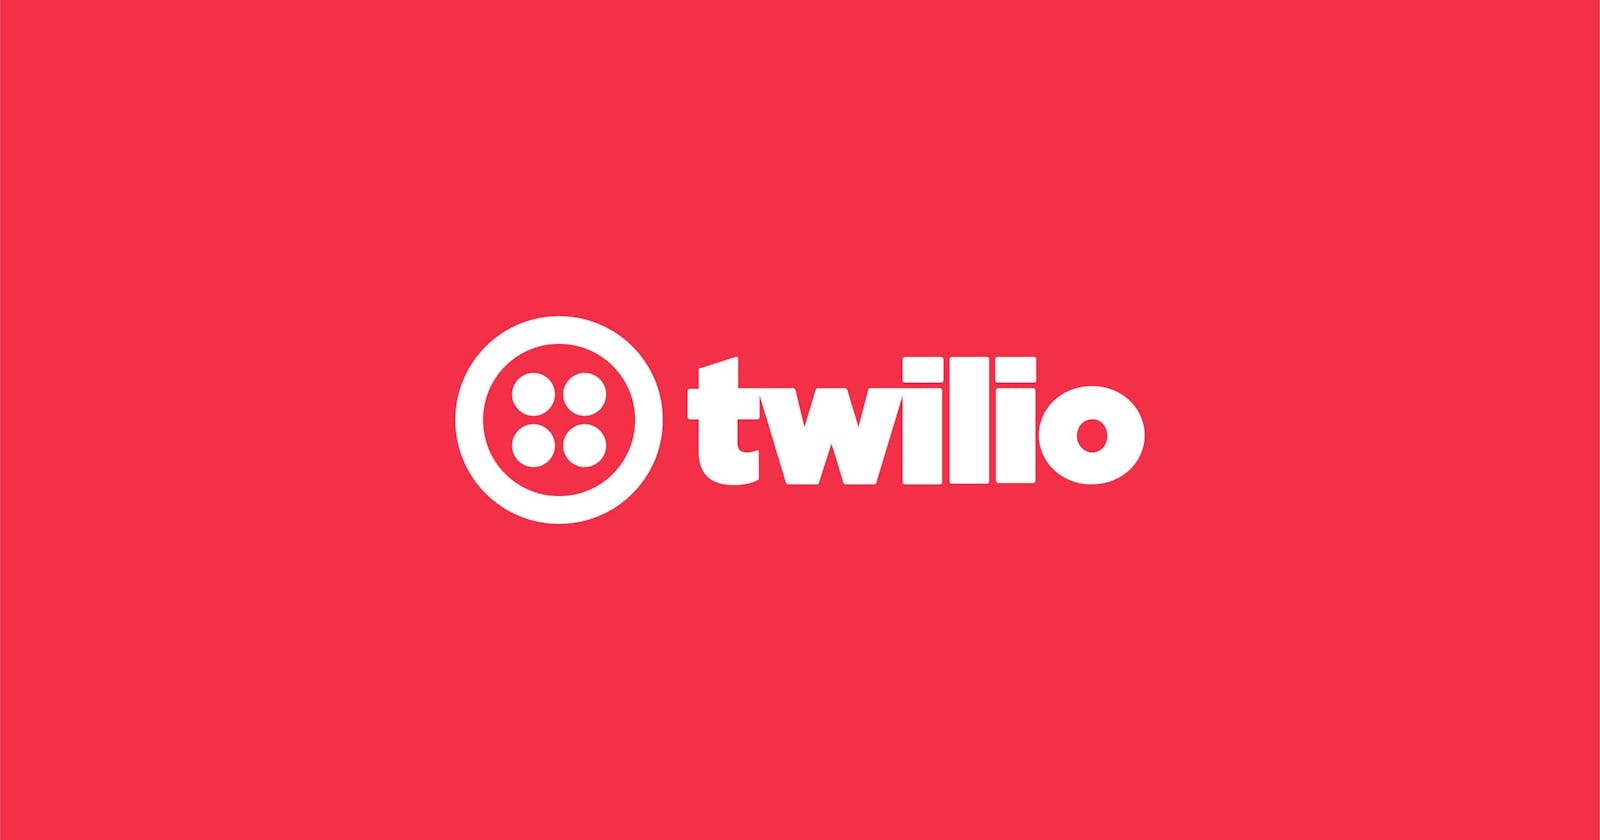 Build a voice product review system using Twilio voice and Ngrok